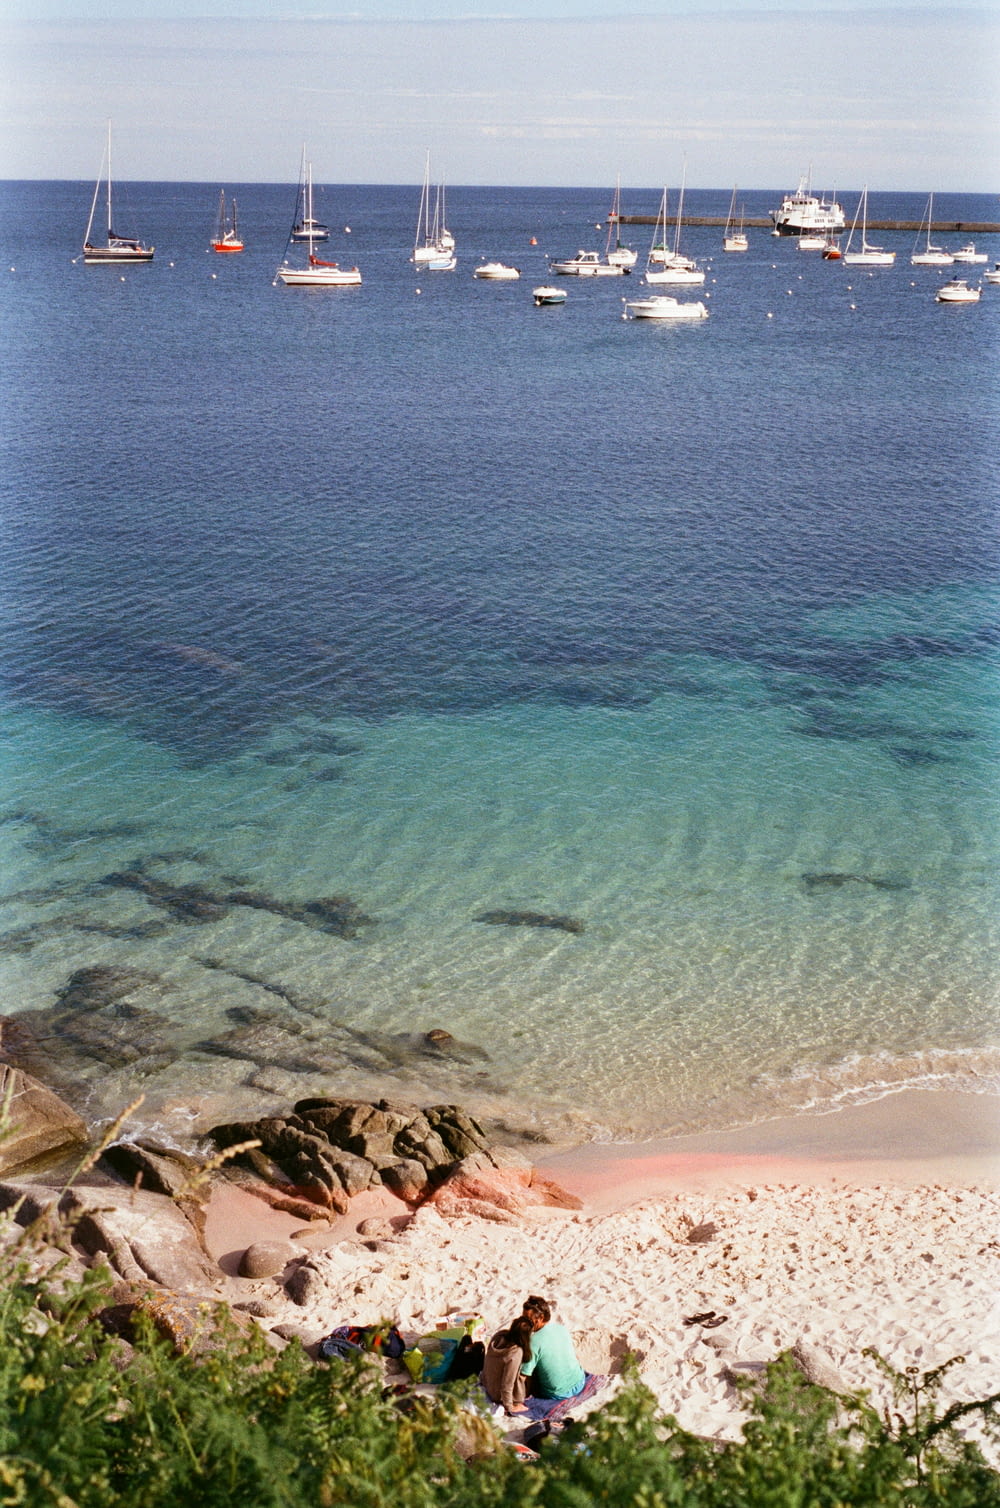 a group of people sitting on a rocky beach with boats in the water